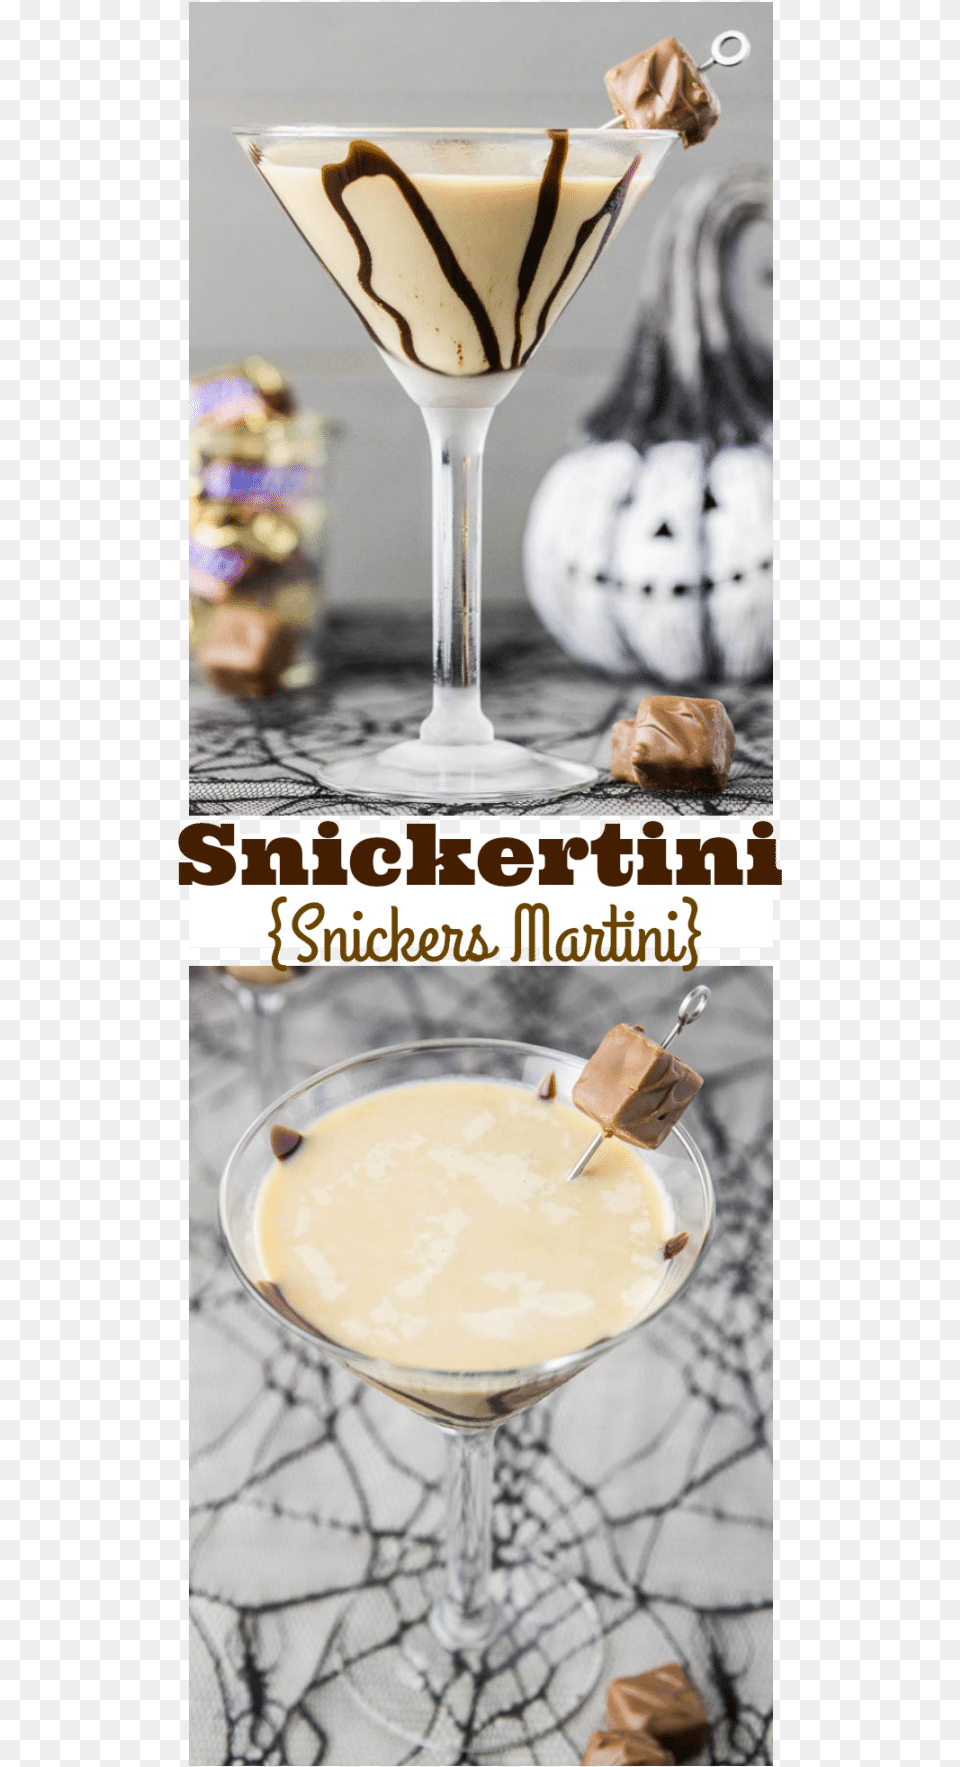 Snickertini Snickers Martini Rompope, Alcohol, Beverage, Cocktail, Girl Png